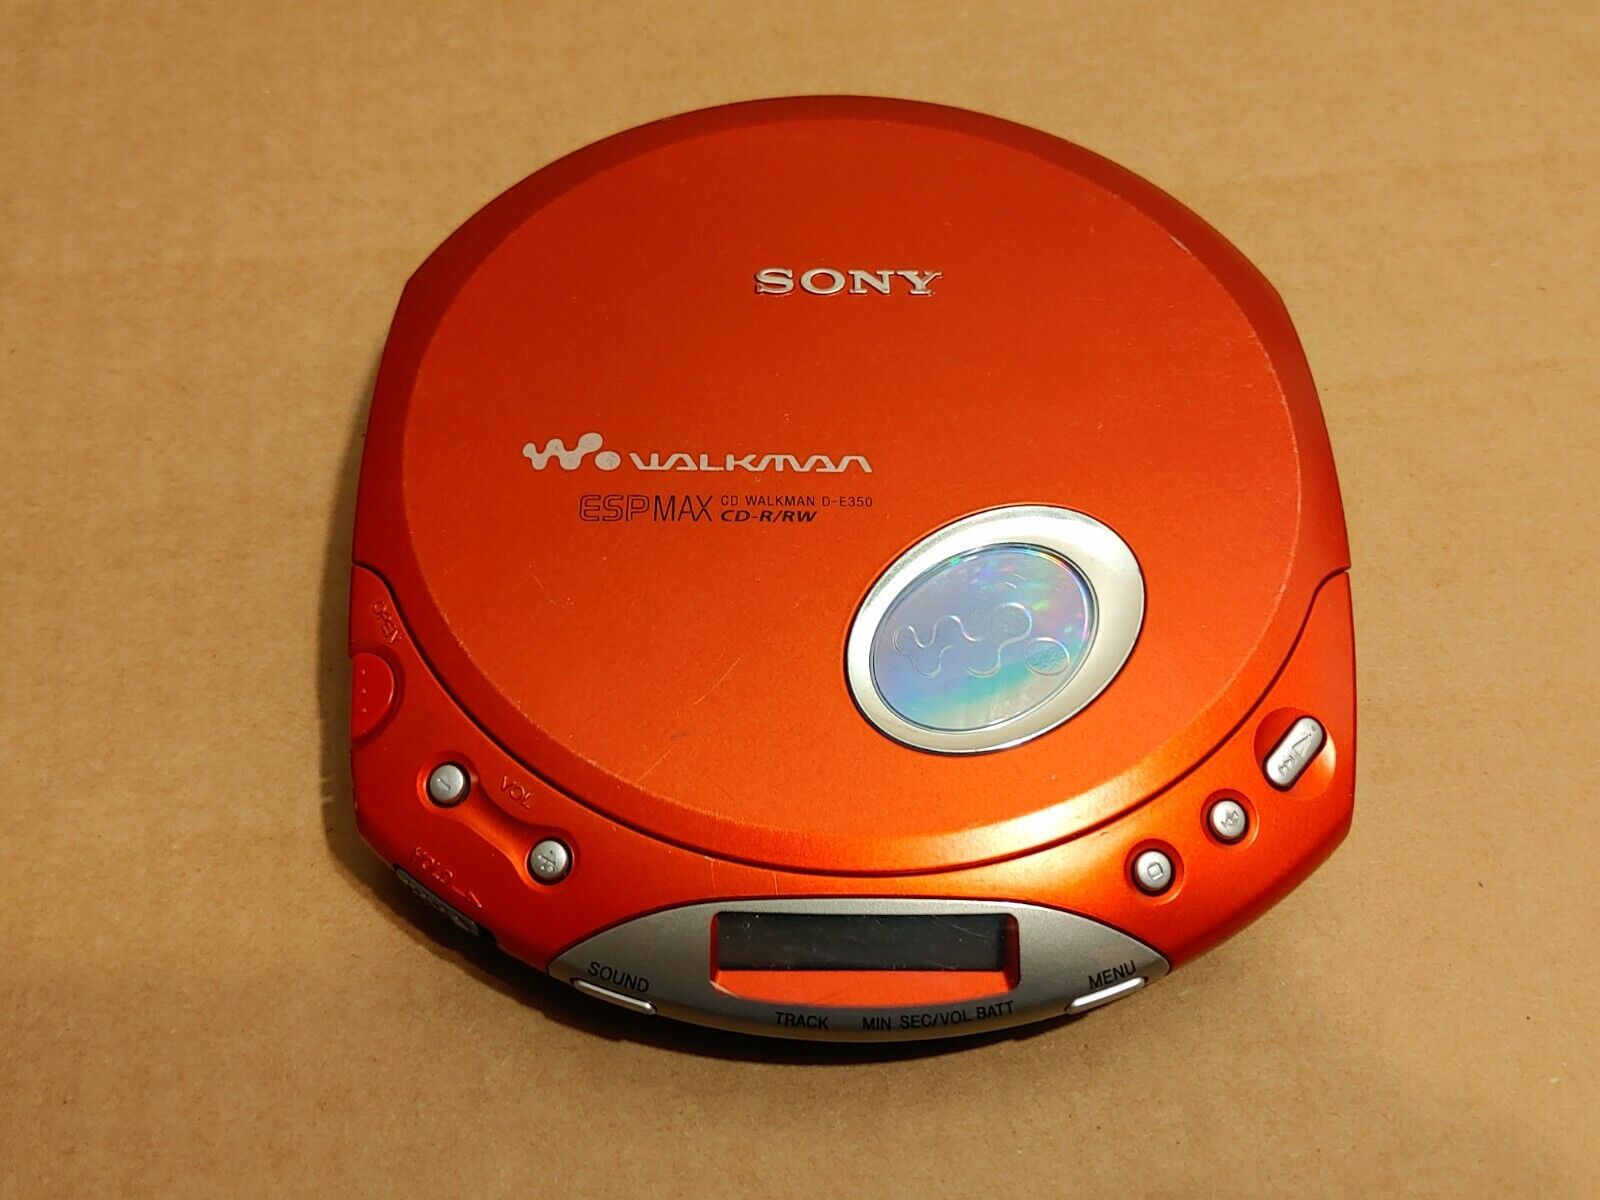 Sony CD Walkman D-E350 ESP Max Portable CD Player - Red - TESTED & WORKS